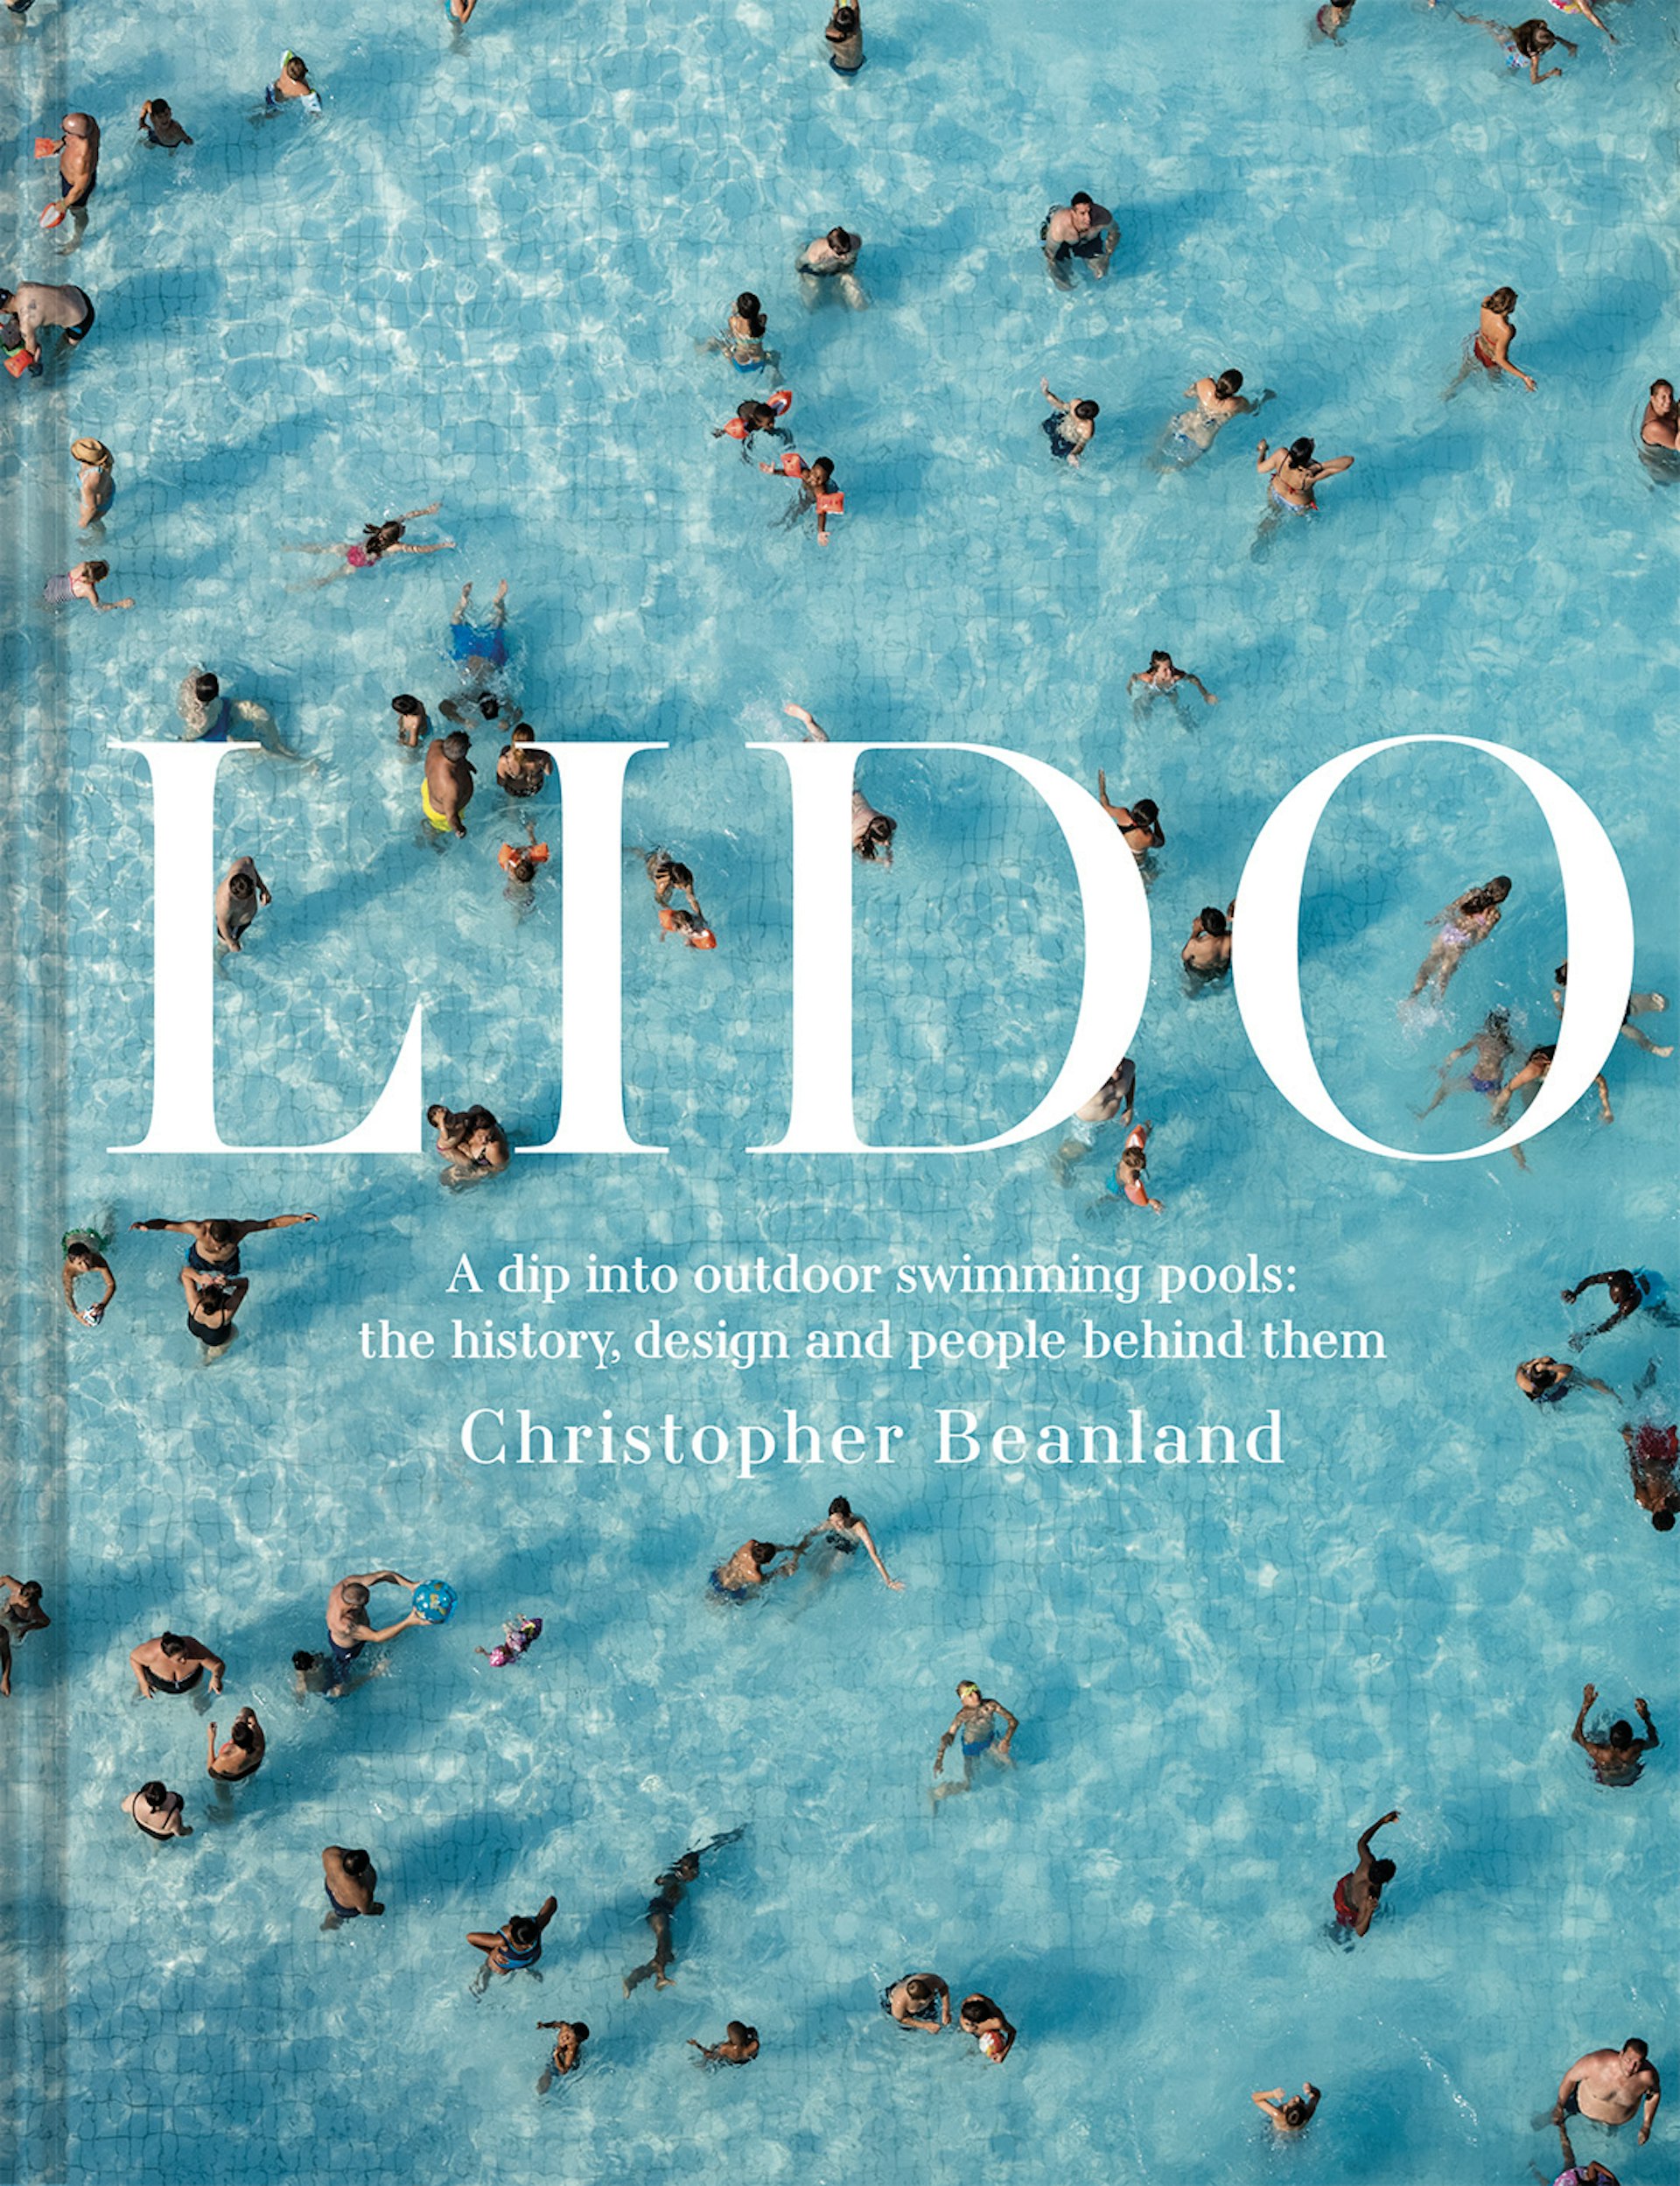 The cover of the book "Lido", featuring an overhead image of bathers at a pool